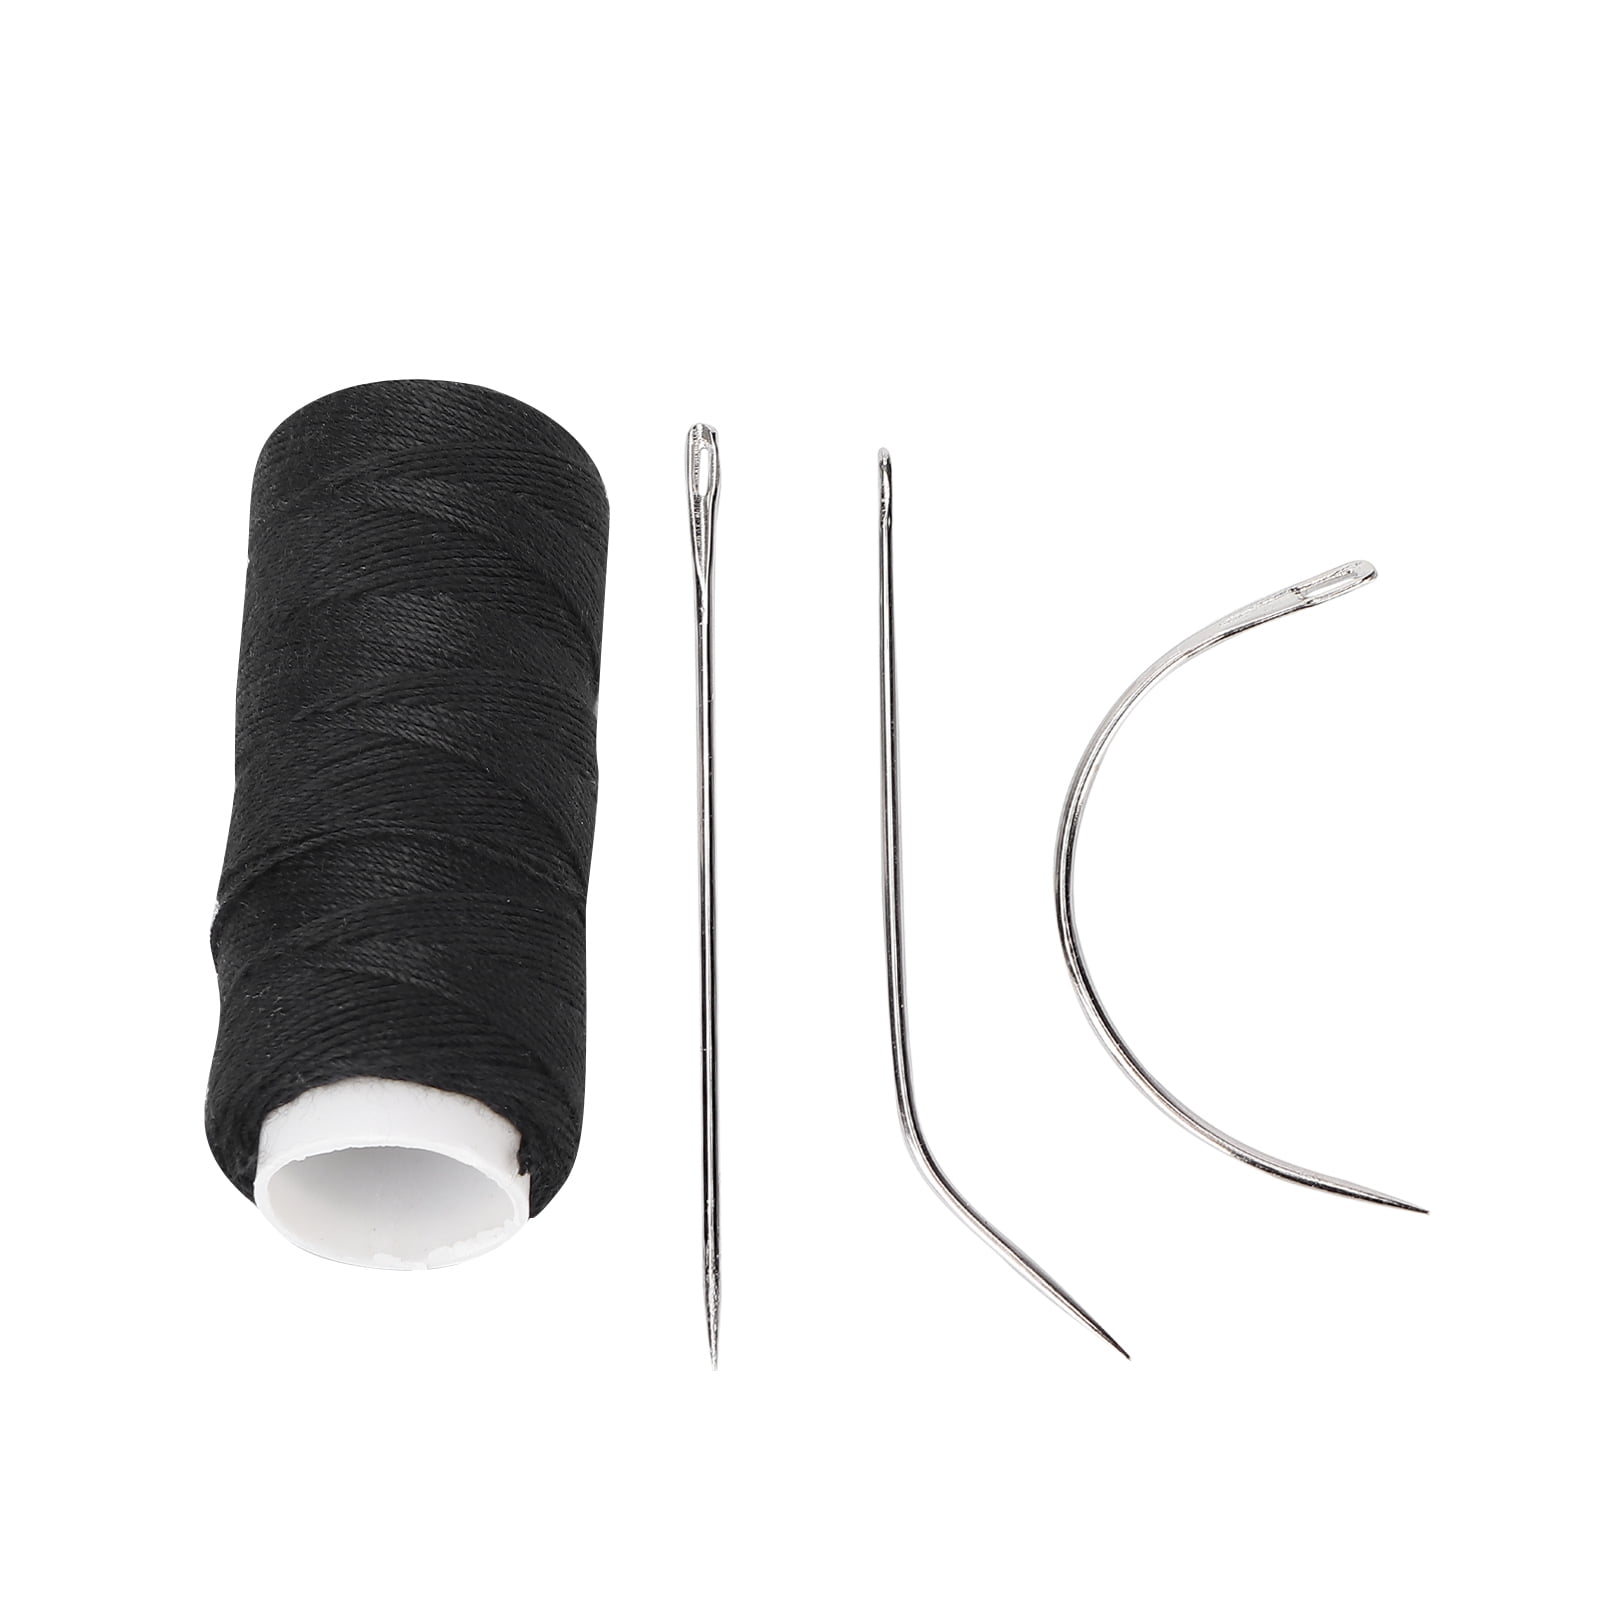 Curved Sewing , Hair Thread And Needle Tools Comfortable Grasp For Making  For Crafts For Weaving 